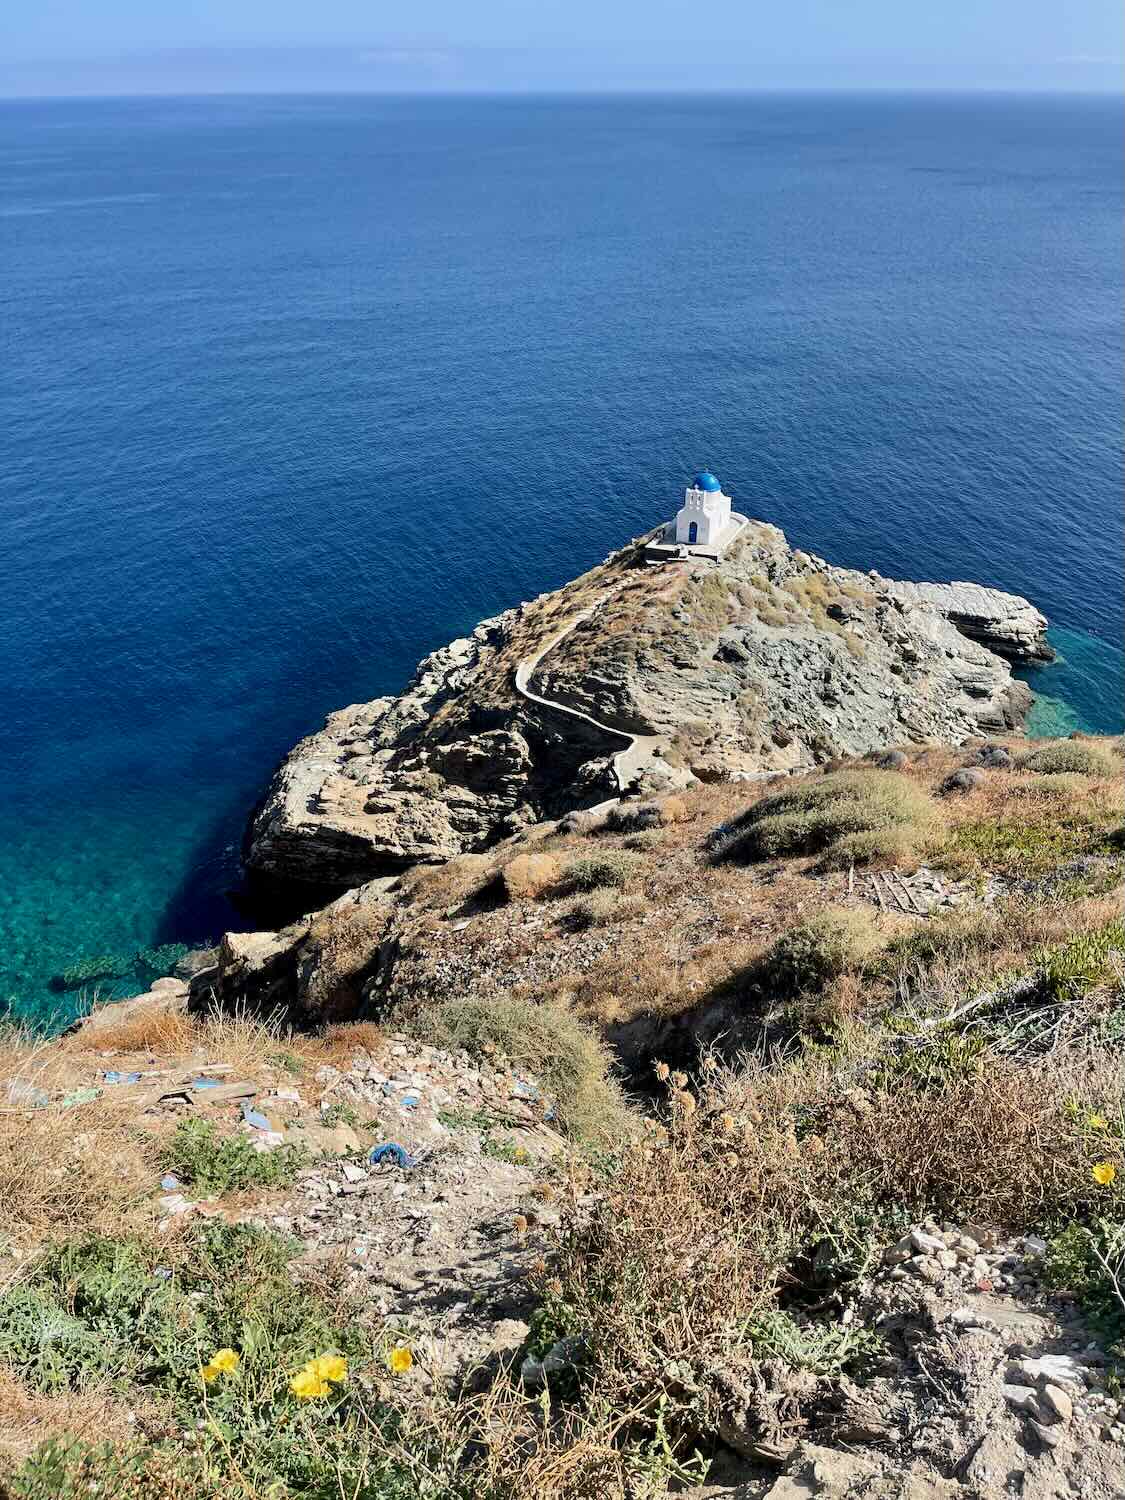 The iconic blue-domed church of Kastro perched on a rocky promontory jutting into the cerulean Aegean Sea, a must-see destination 